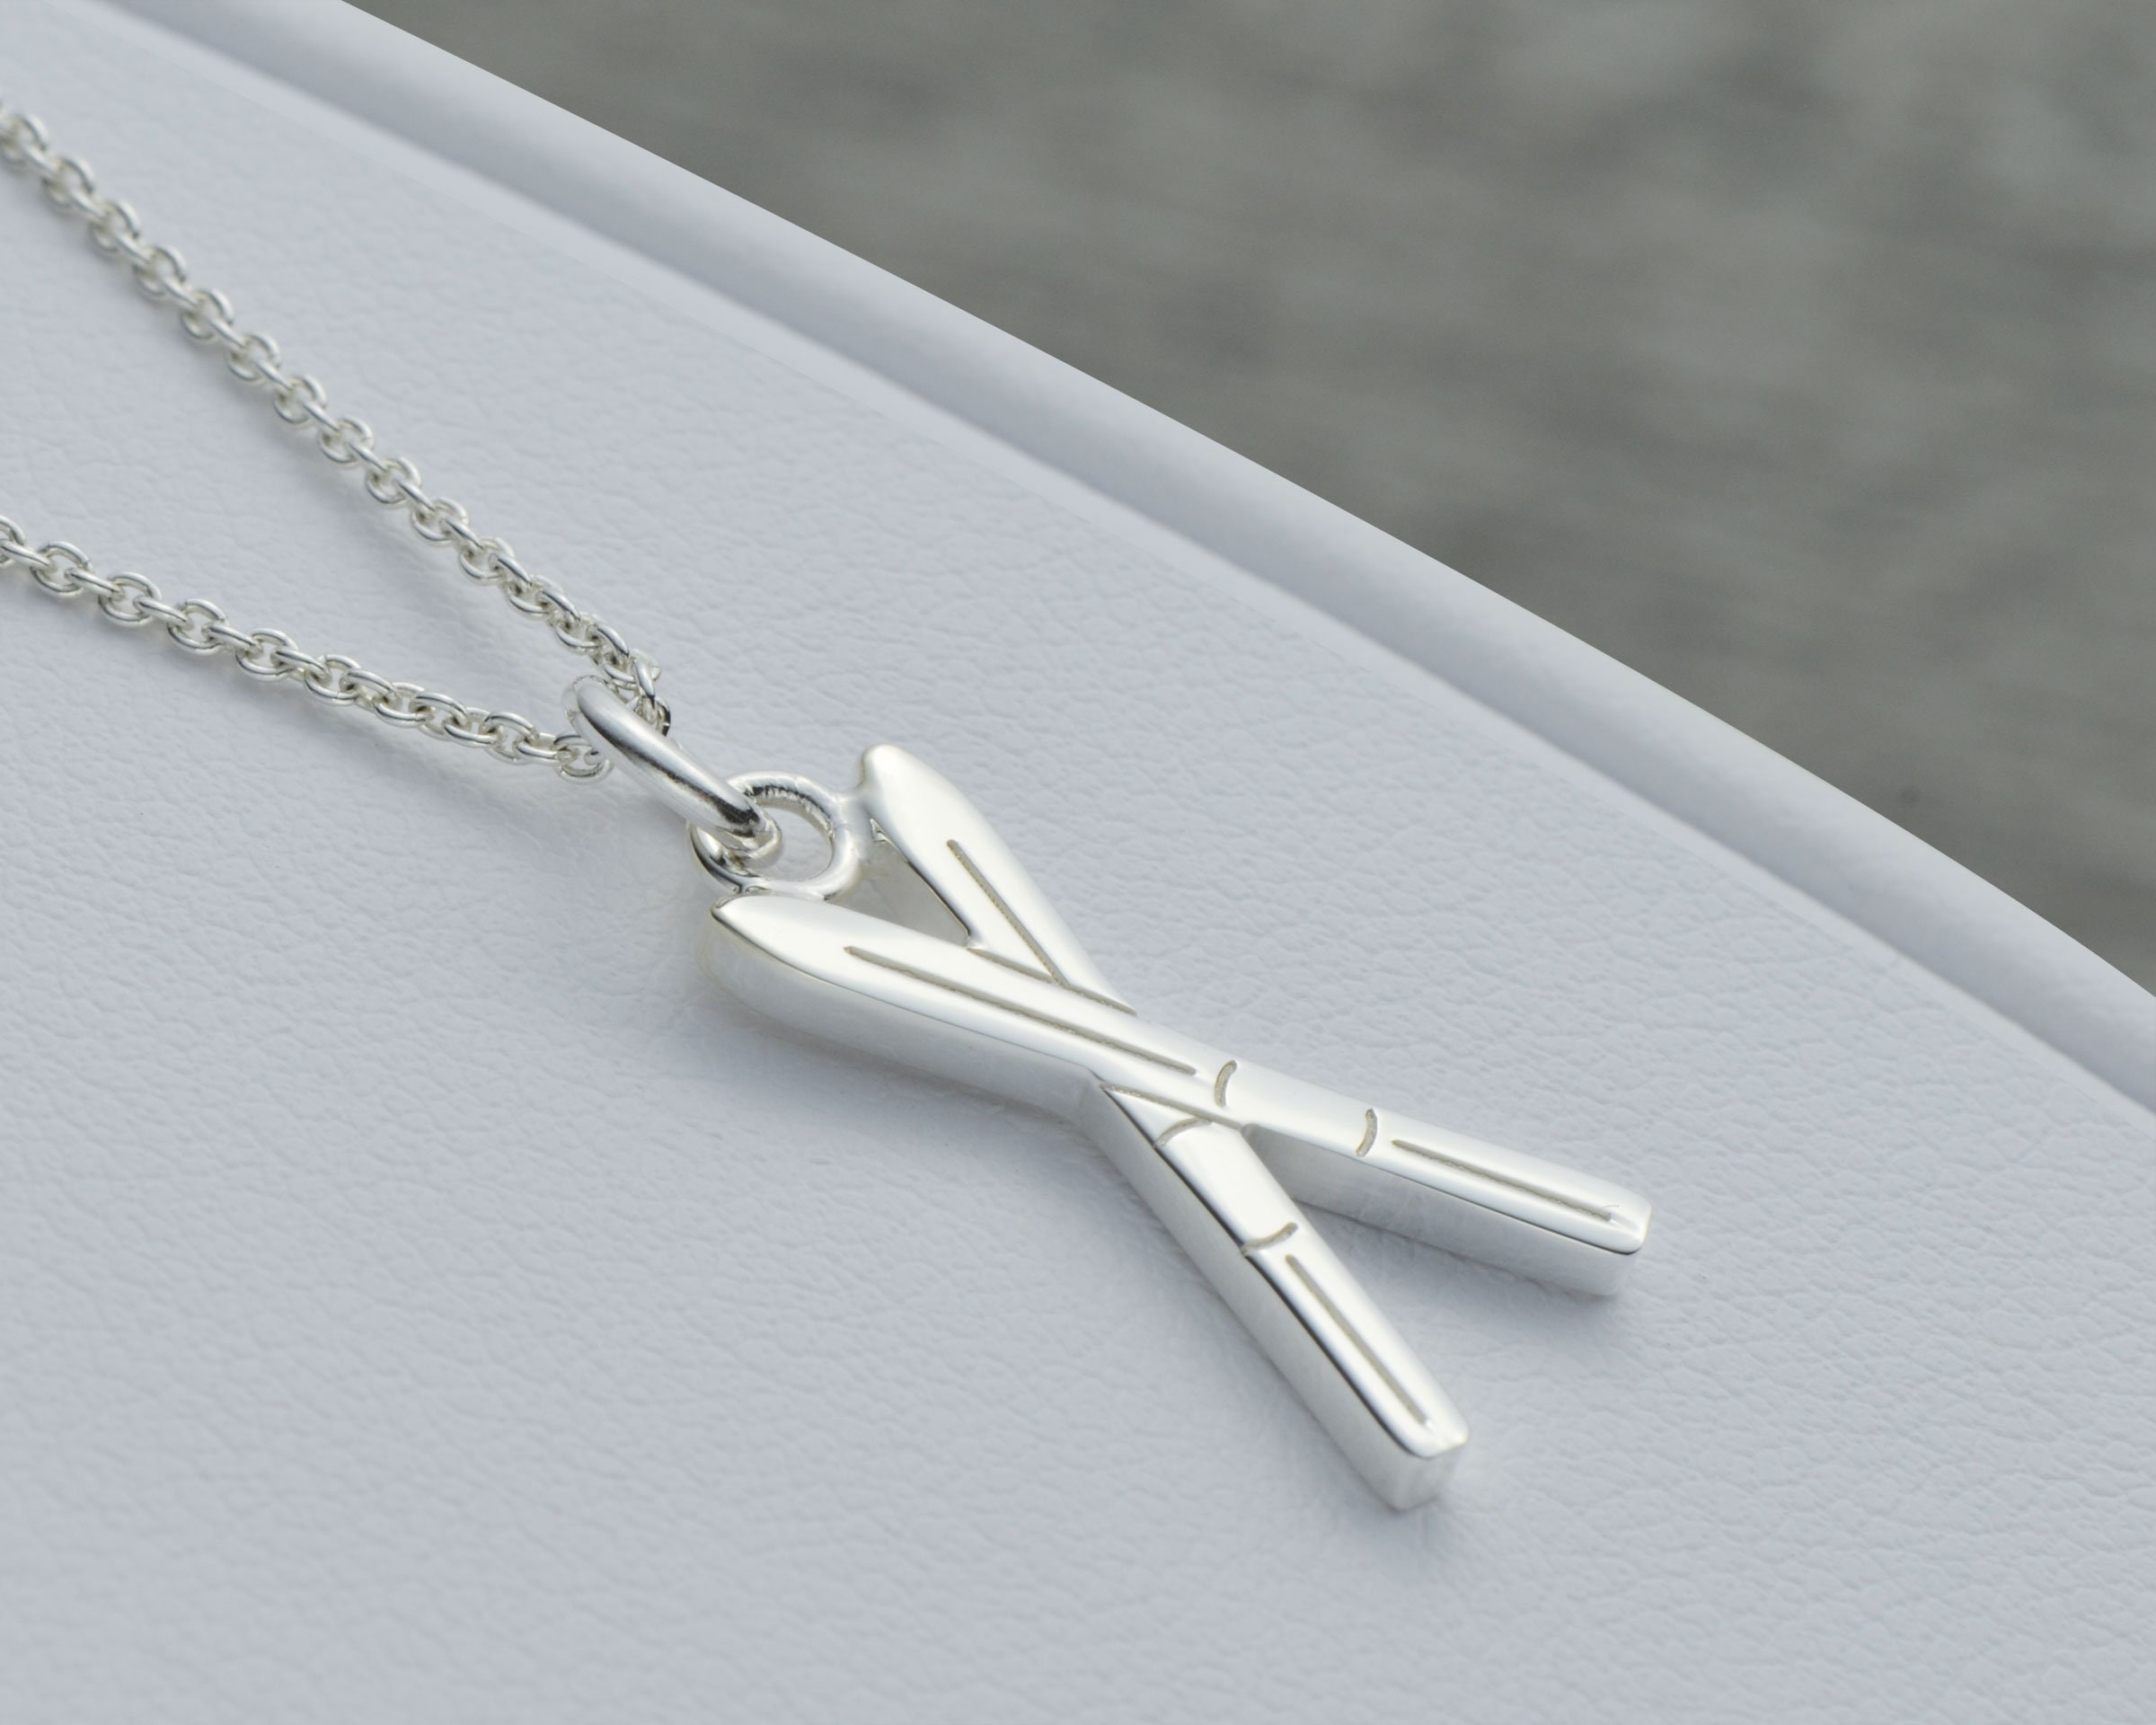 Skiing ski Snow Sports 3D Charm Pendant Sterling Silver Jewelry Cross-Country 